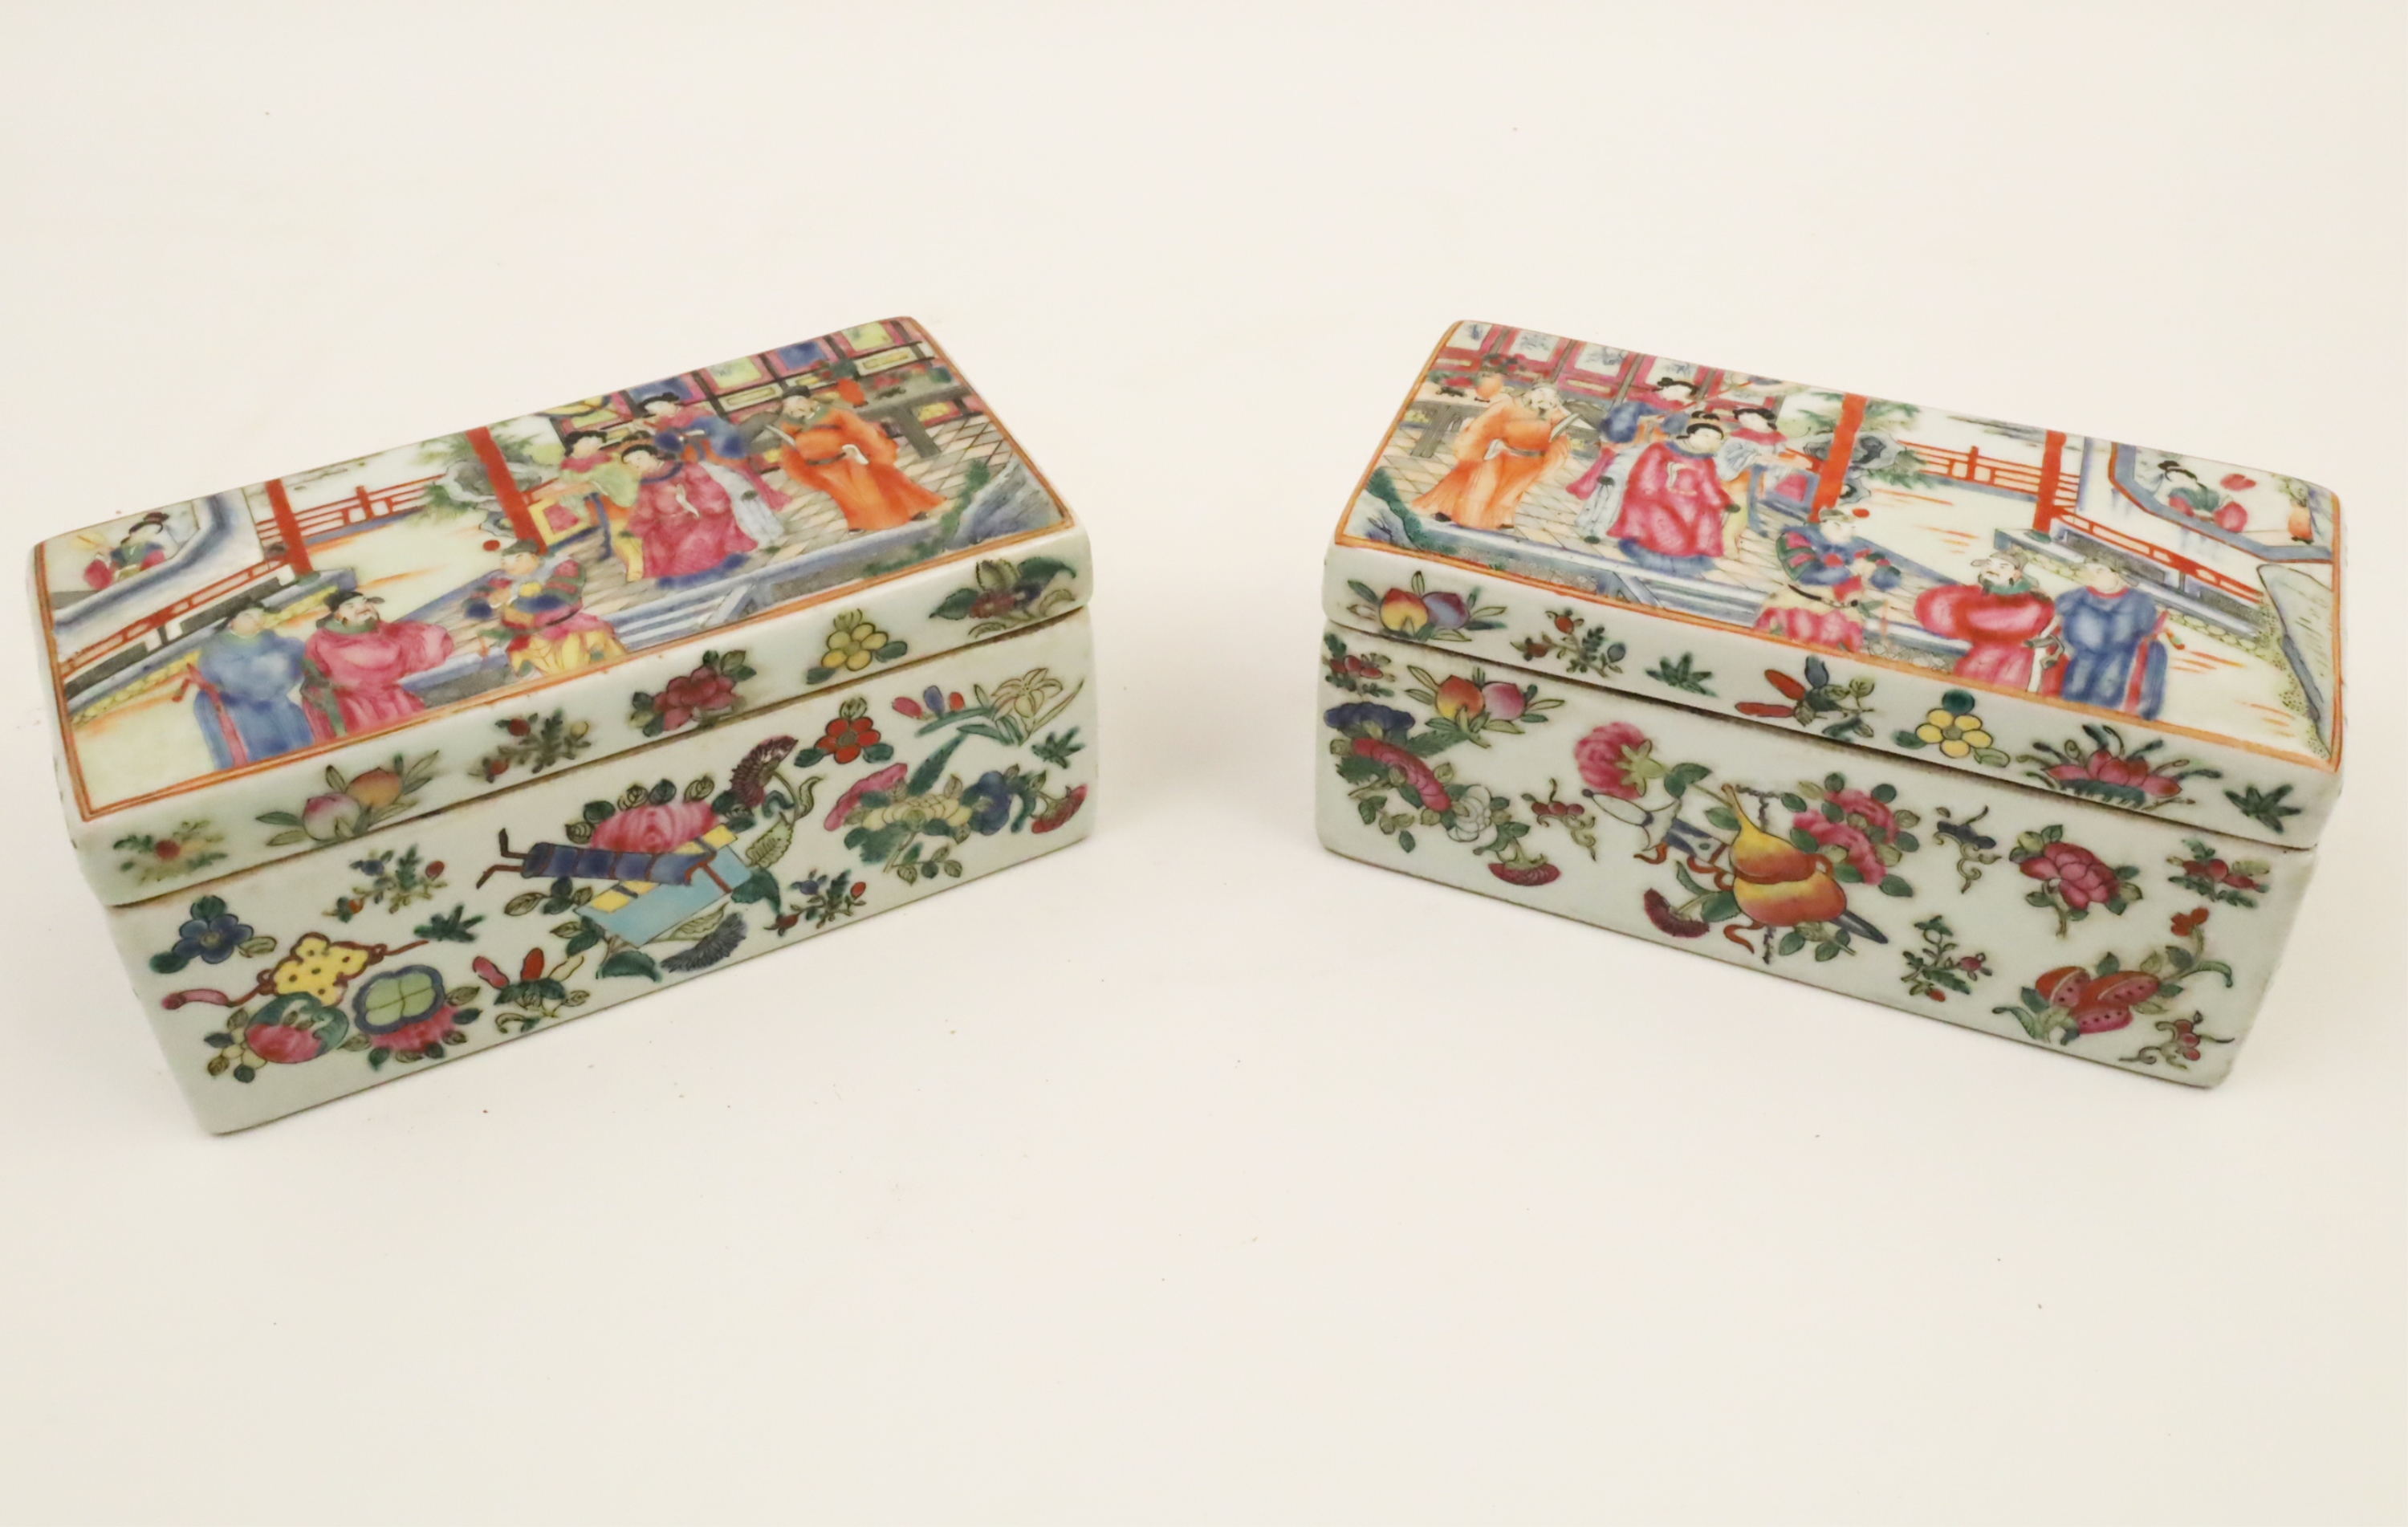 TWO CHINESE FAMILLE ROSE PORCELAIN